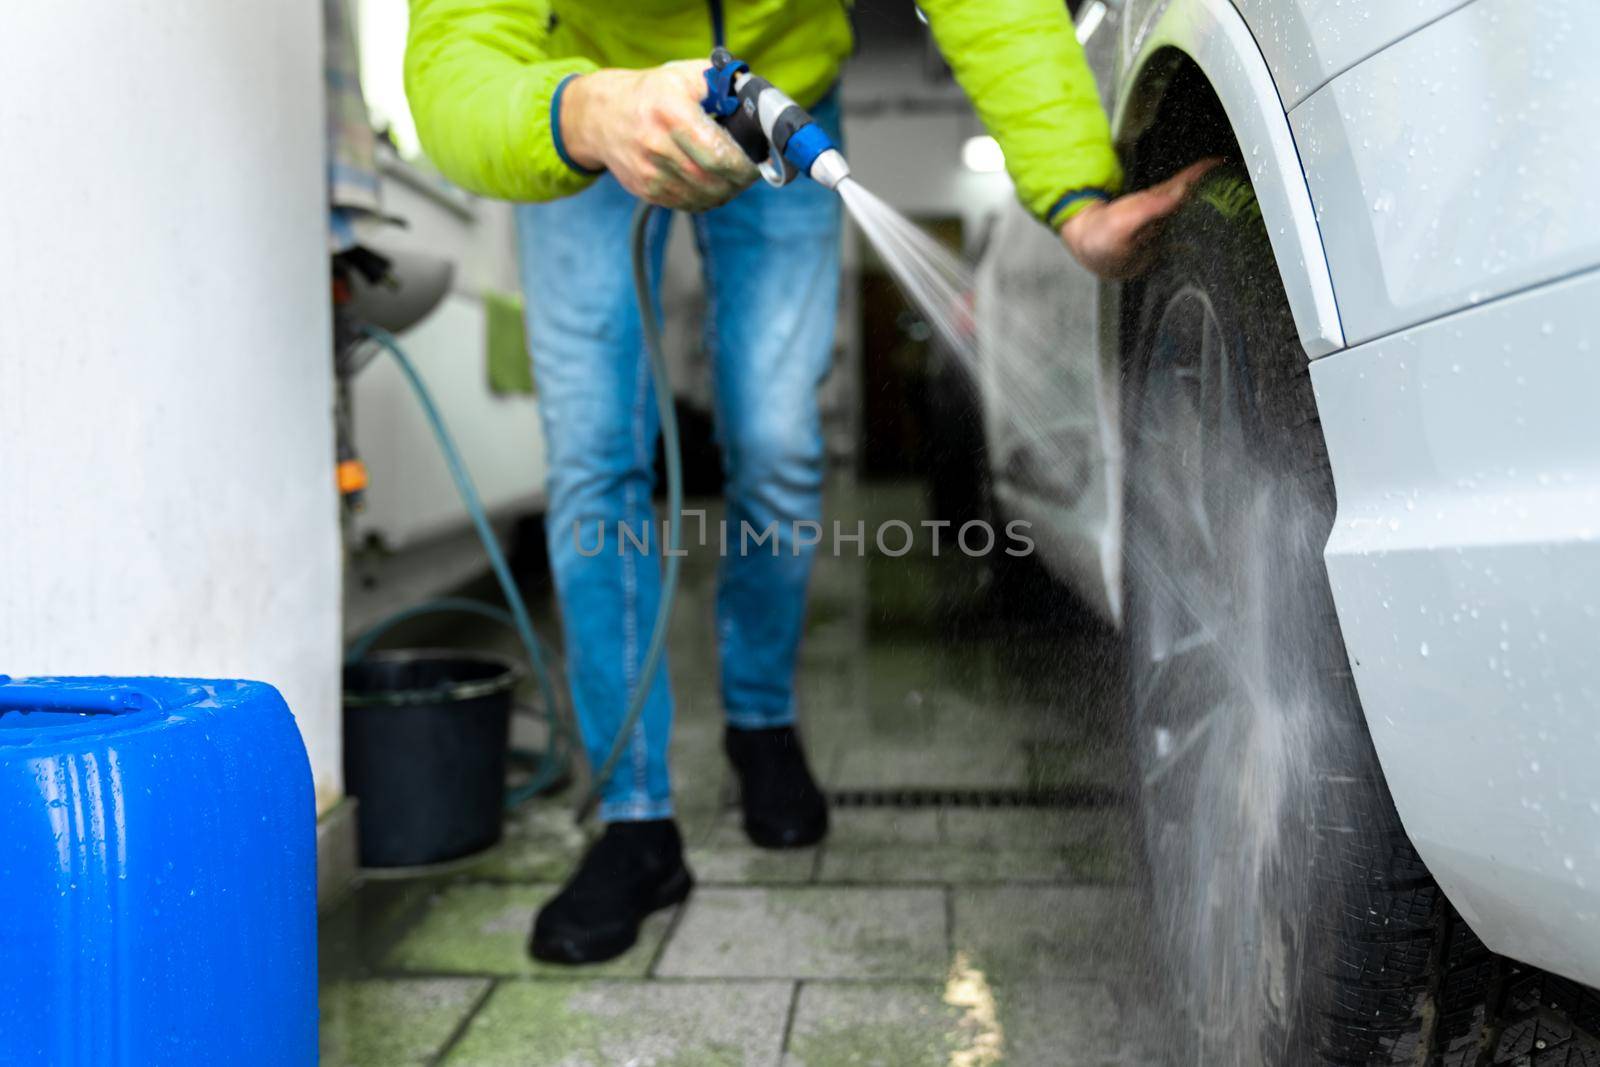 manually wash car wheels using pressure hoses with water by Edophoto